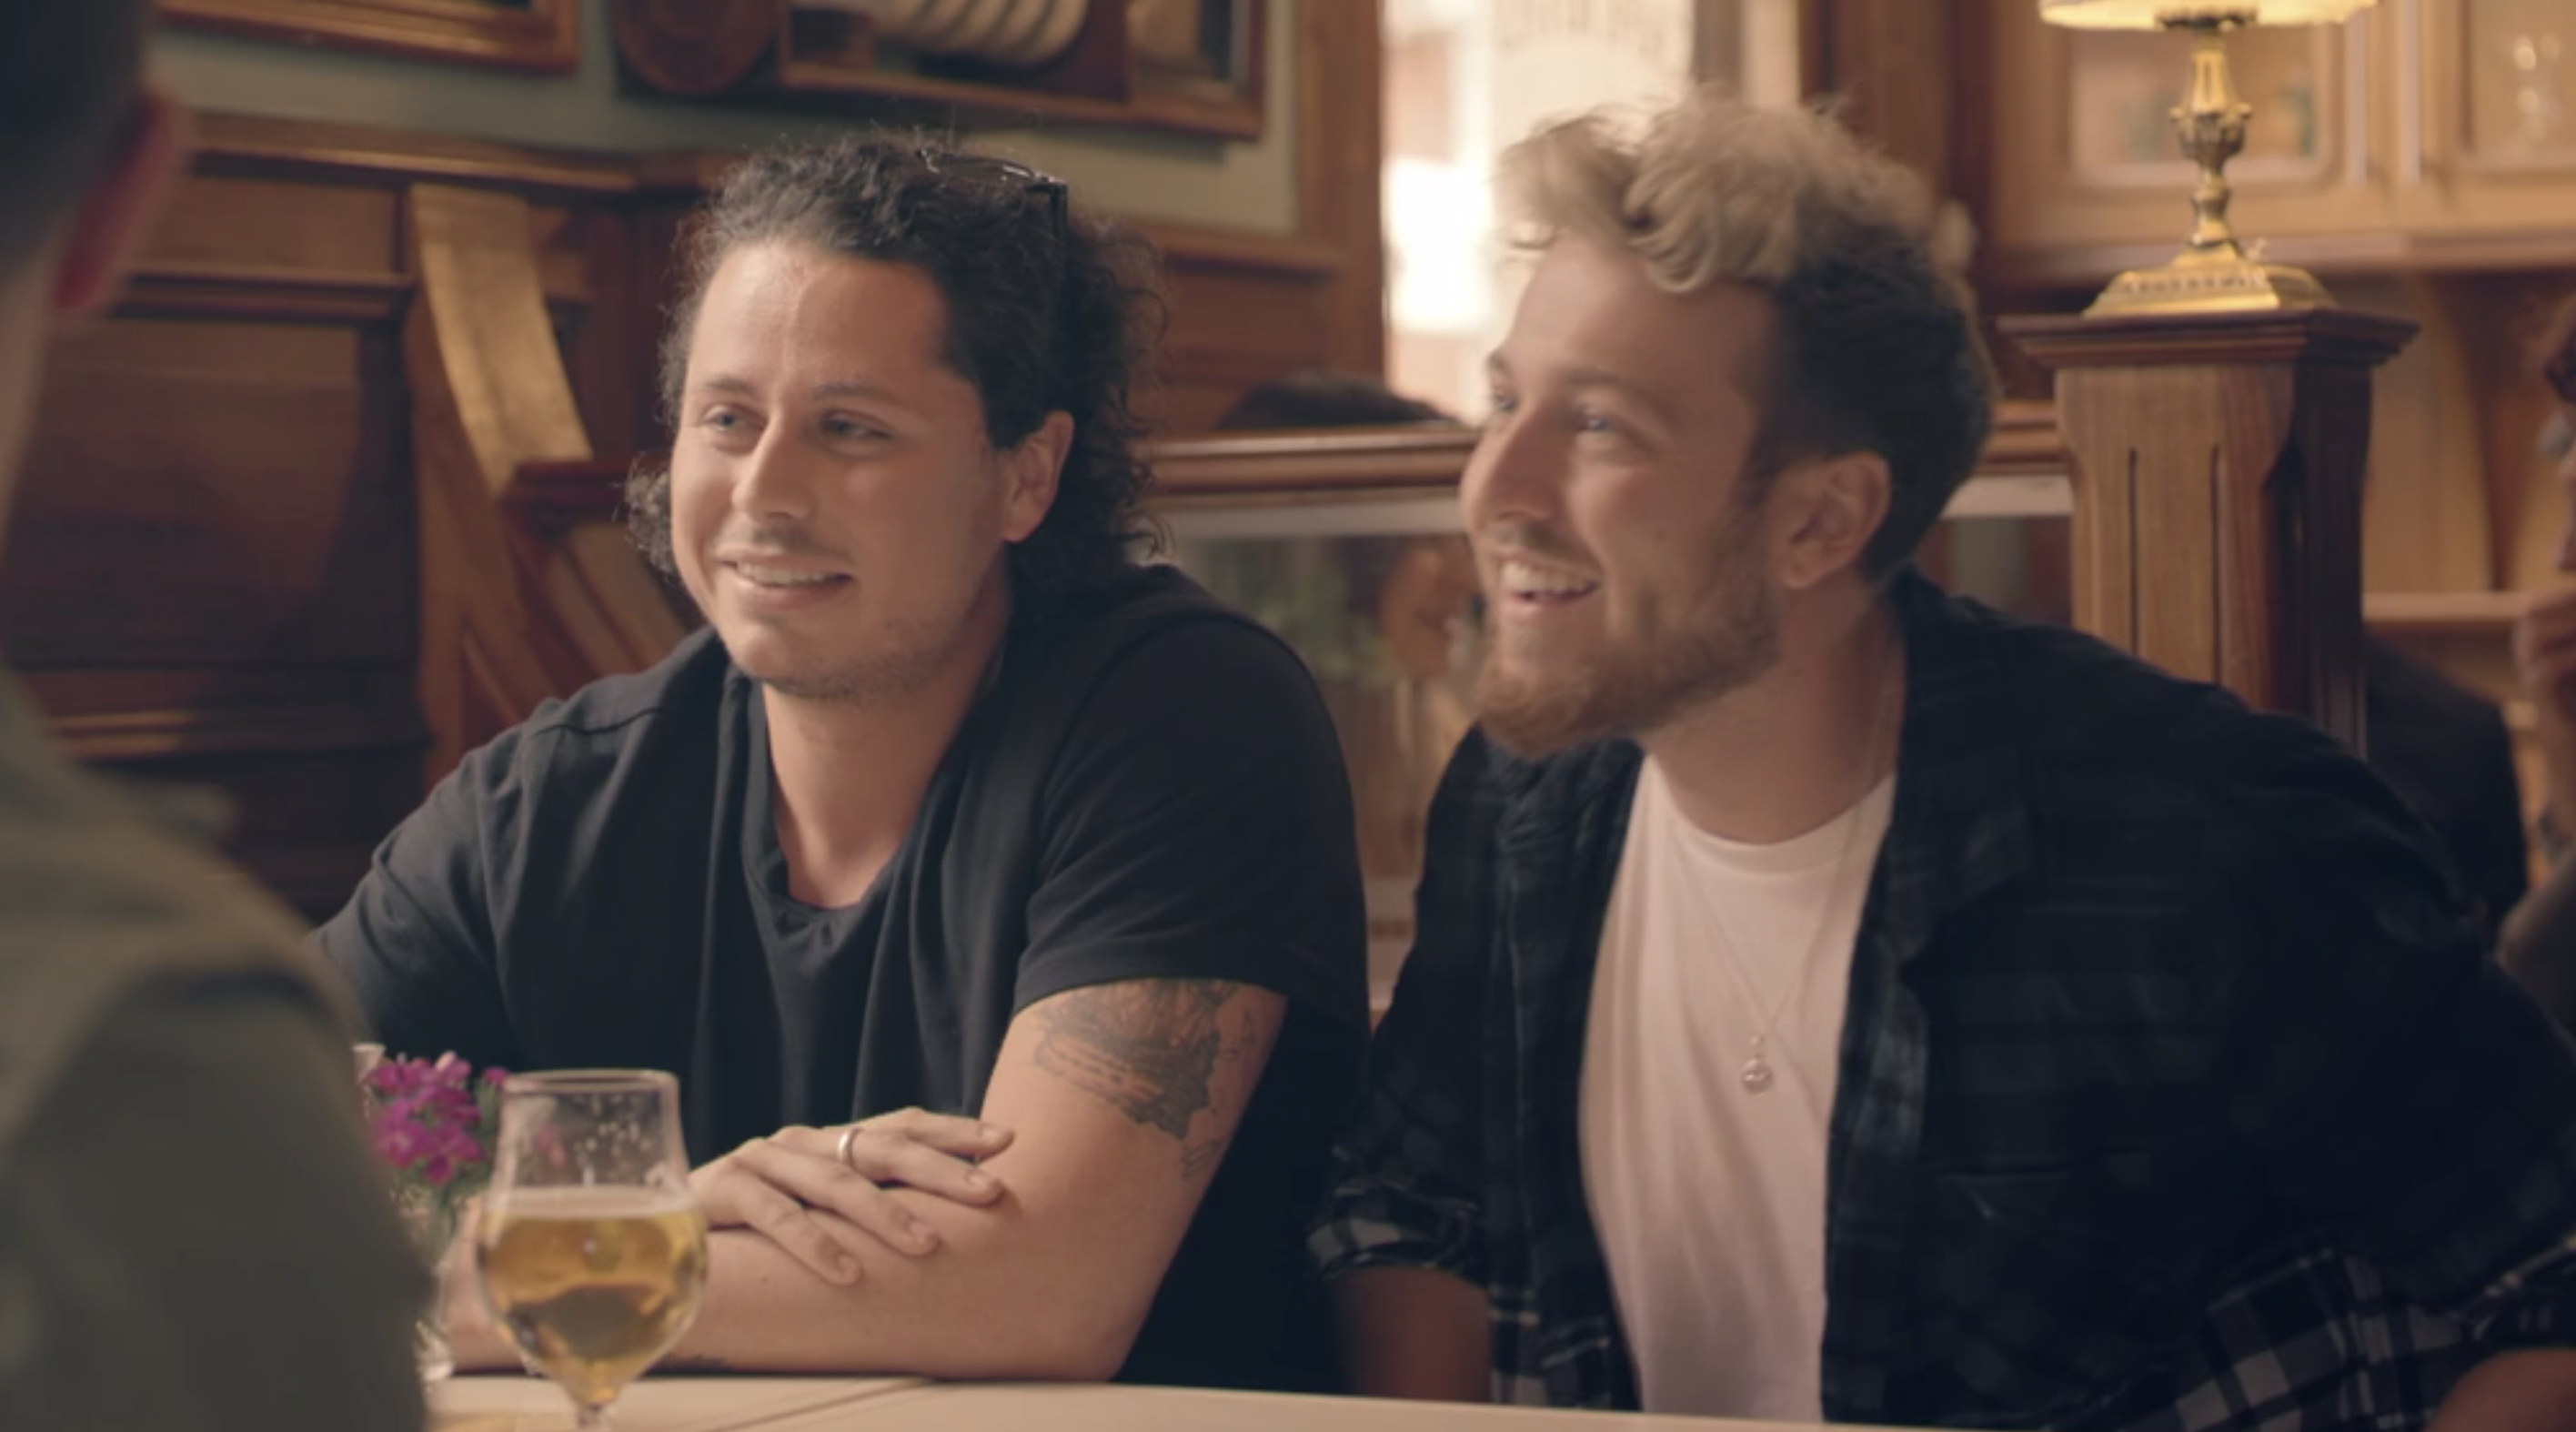 Made in Chelsea: Meet Holmes on Insta - he and Harvey Armstrong run a business together!